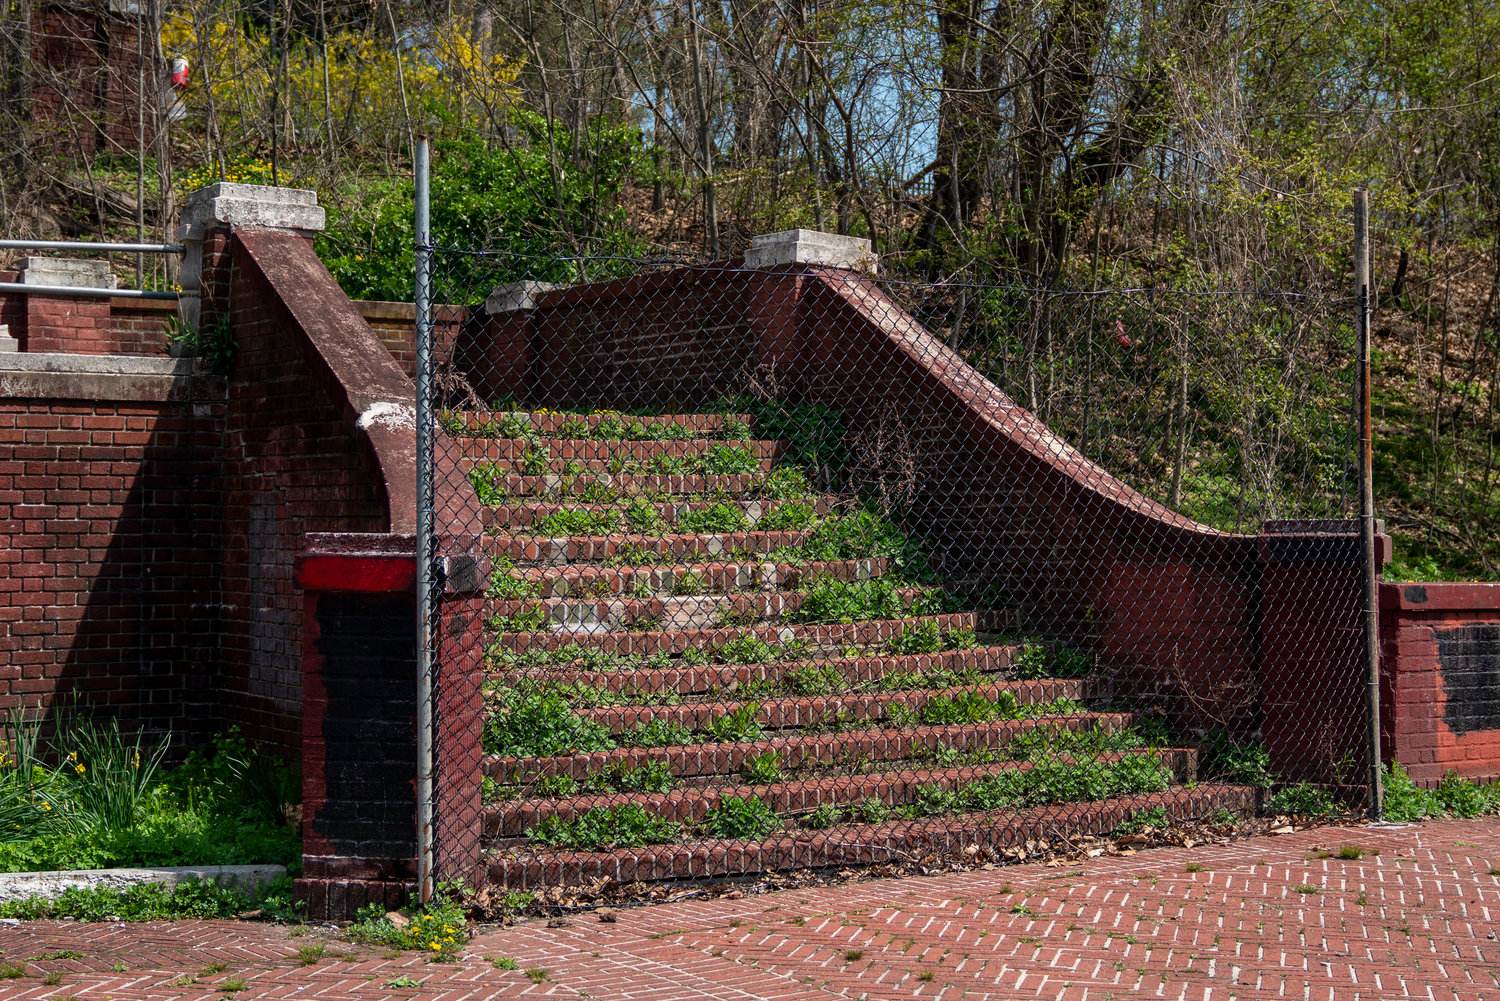 The red steps leading to the Van Cortlandt House were constructed by enslaved people, says Christina Taylor of the Van Cortlandt Park Alliance. Taylor is a part of the Enslaved People Project, which endeavors to draw attention to the contributions enslaved people made on and around the Van Cortlandt homestead.